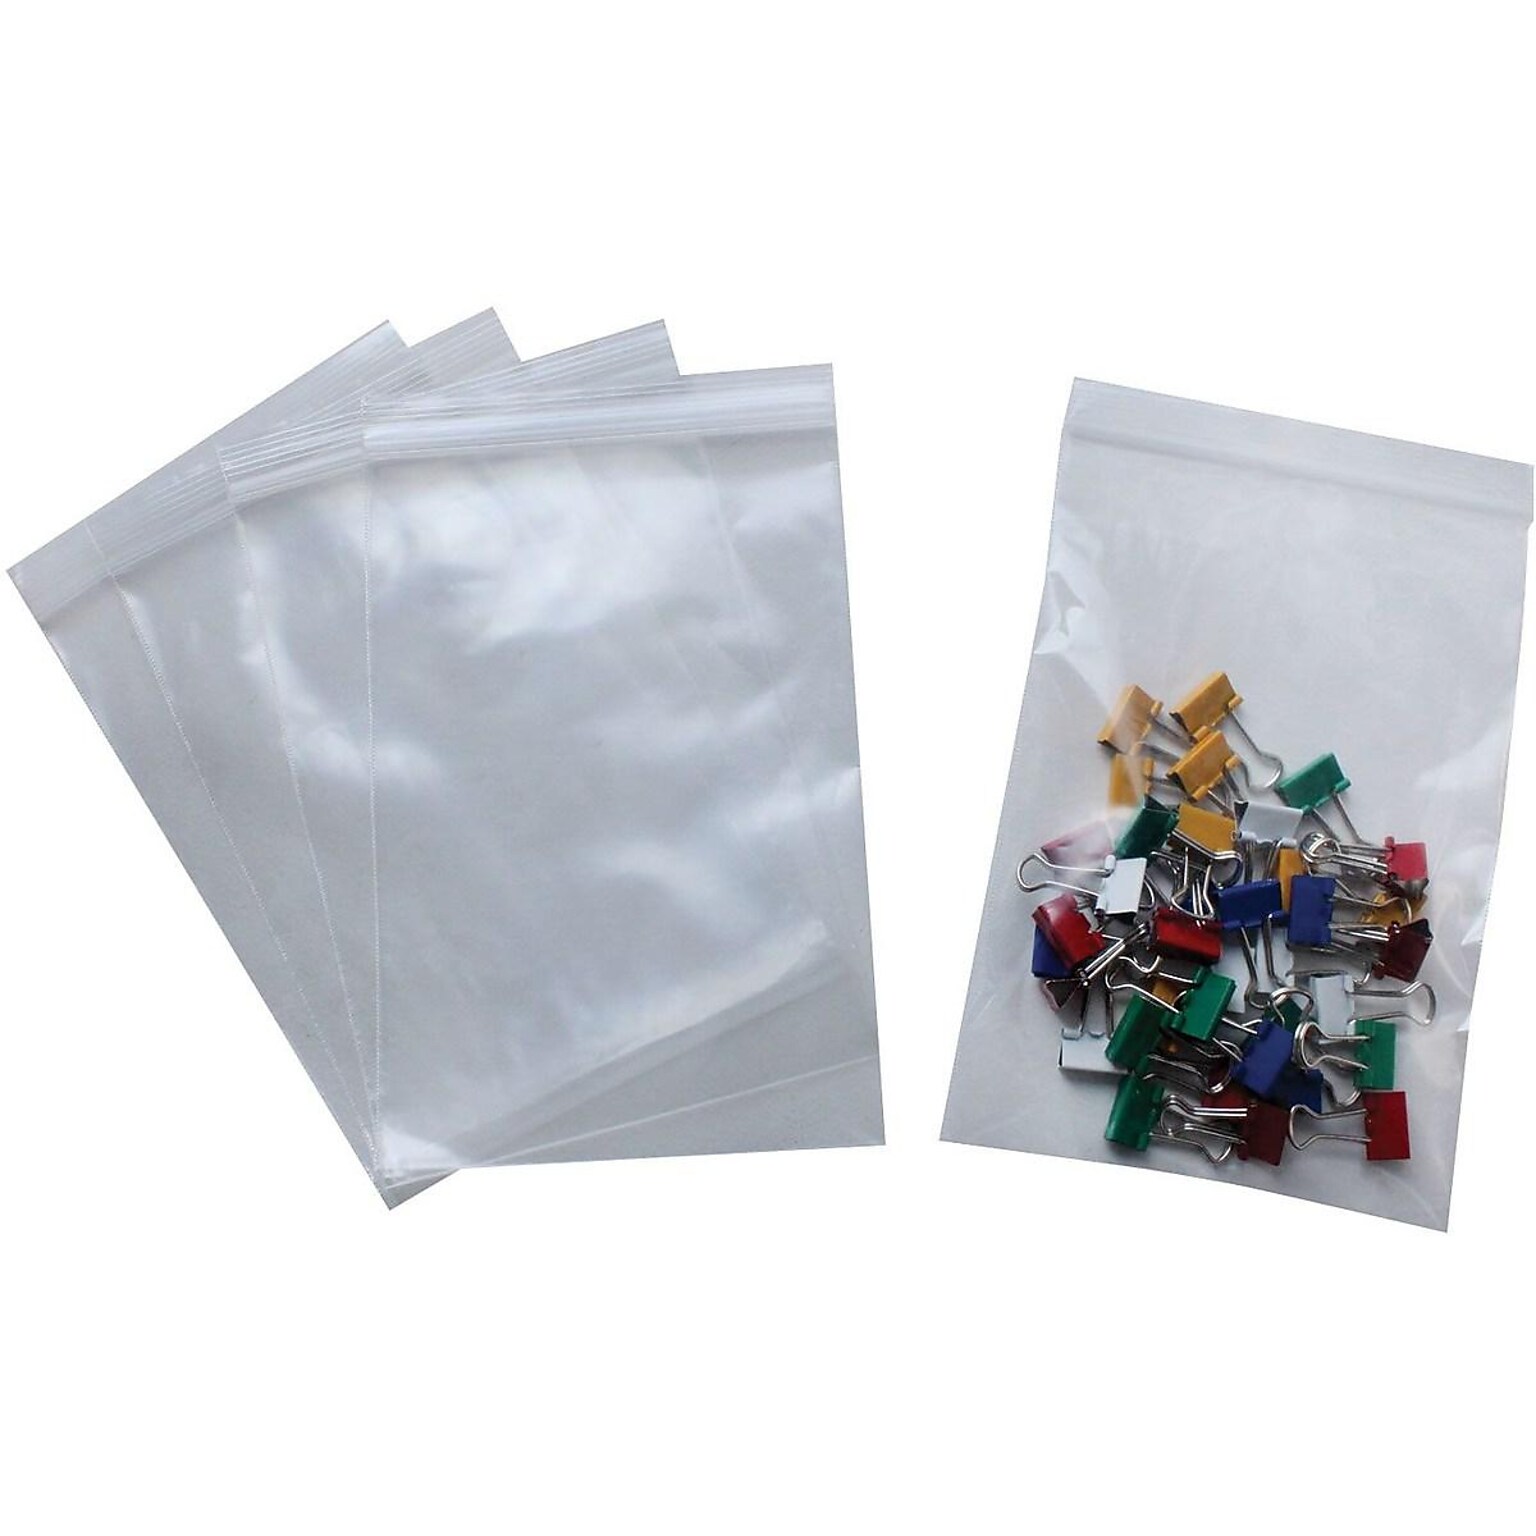 7 x 5 Reclosable Poly Bags, 2 Mil, Clear, 1000/Pack (PB3580)